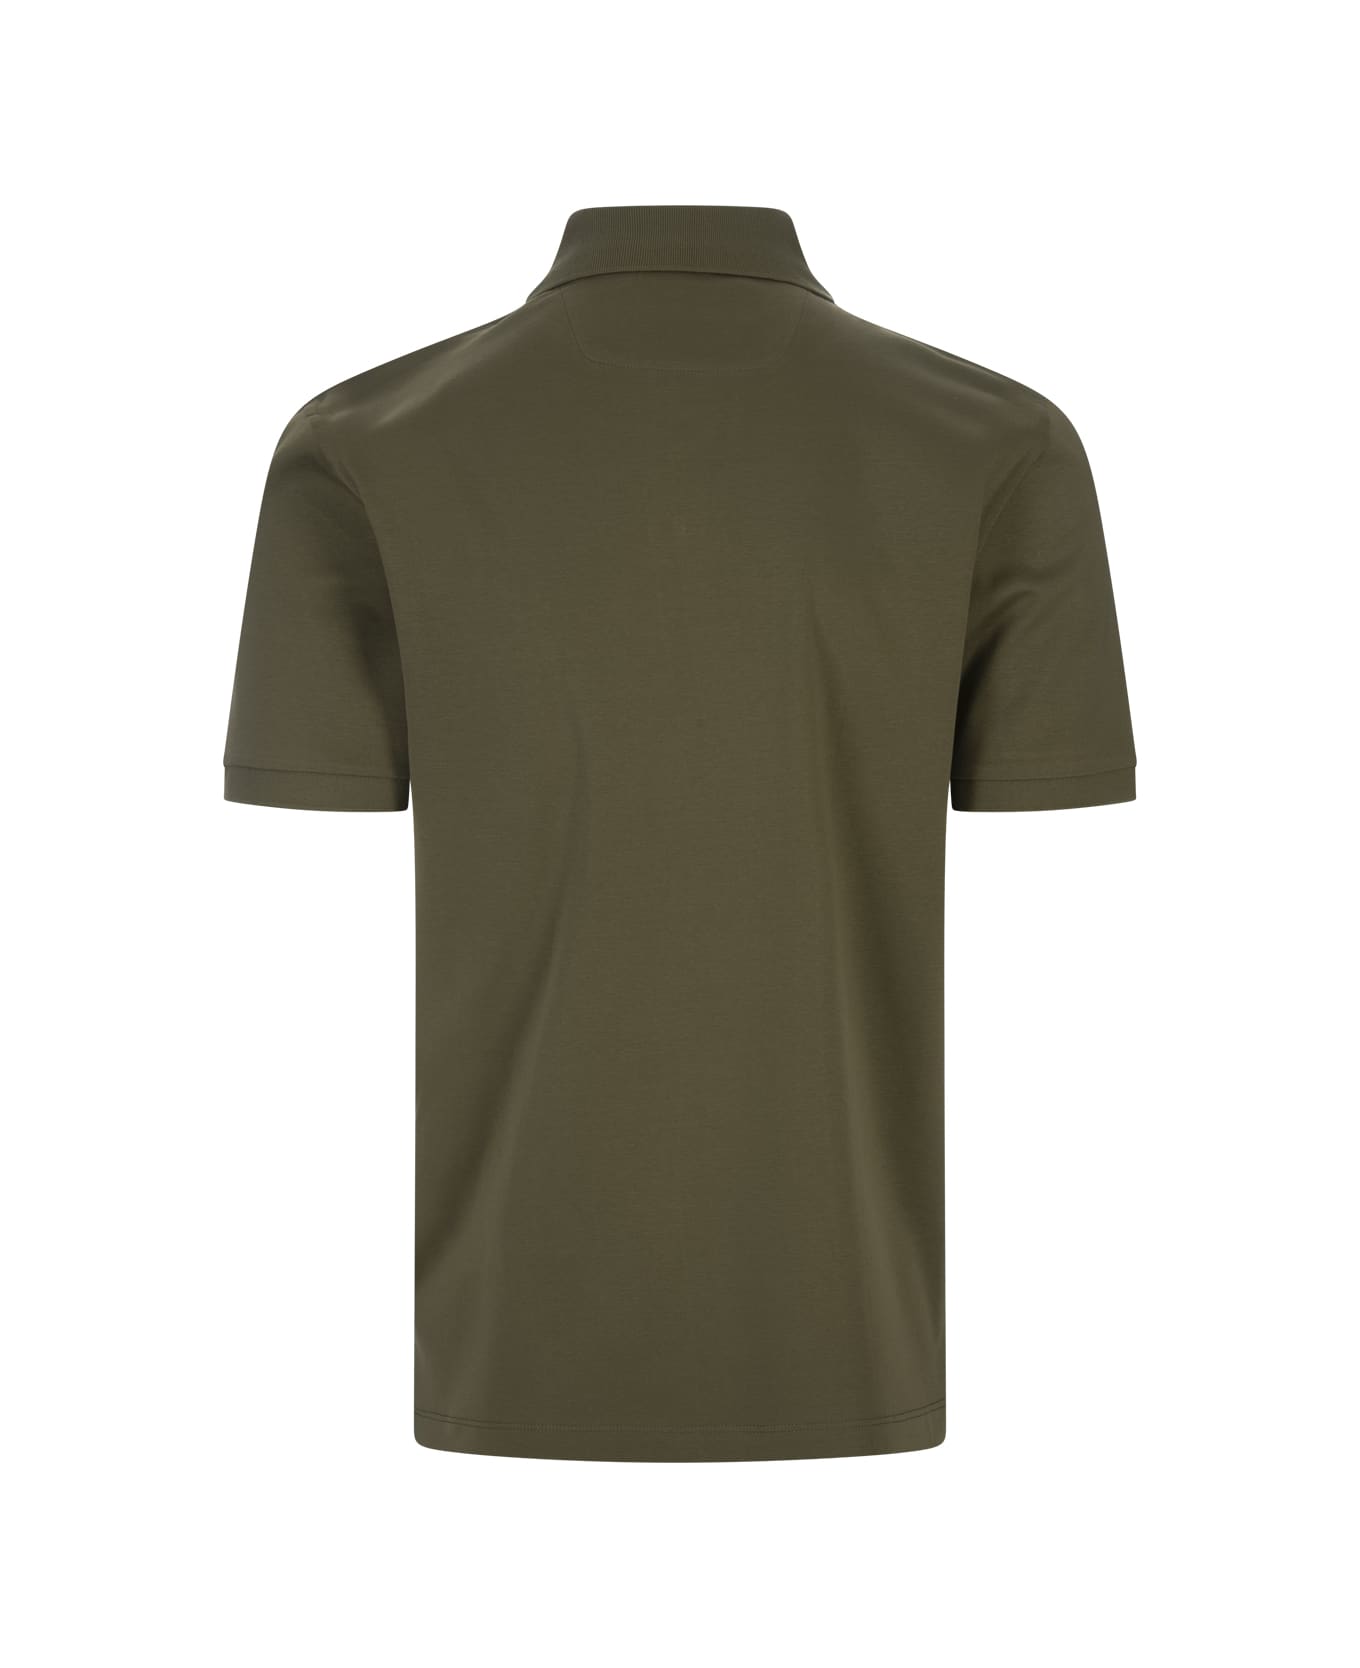 Hugo Boss Military Green Knitted Polo Shirt - Green ポロシャツ